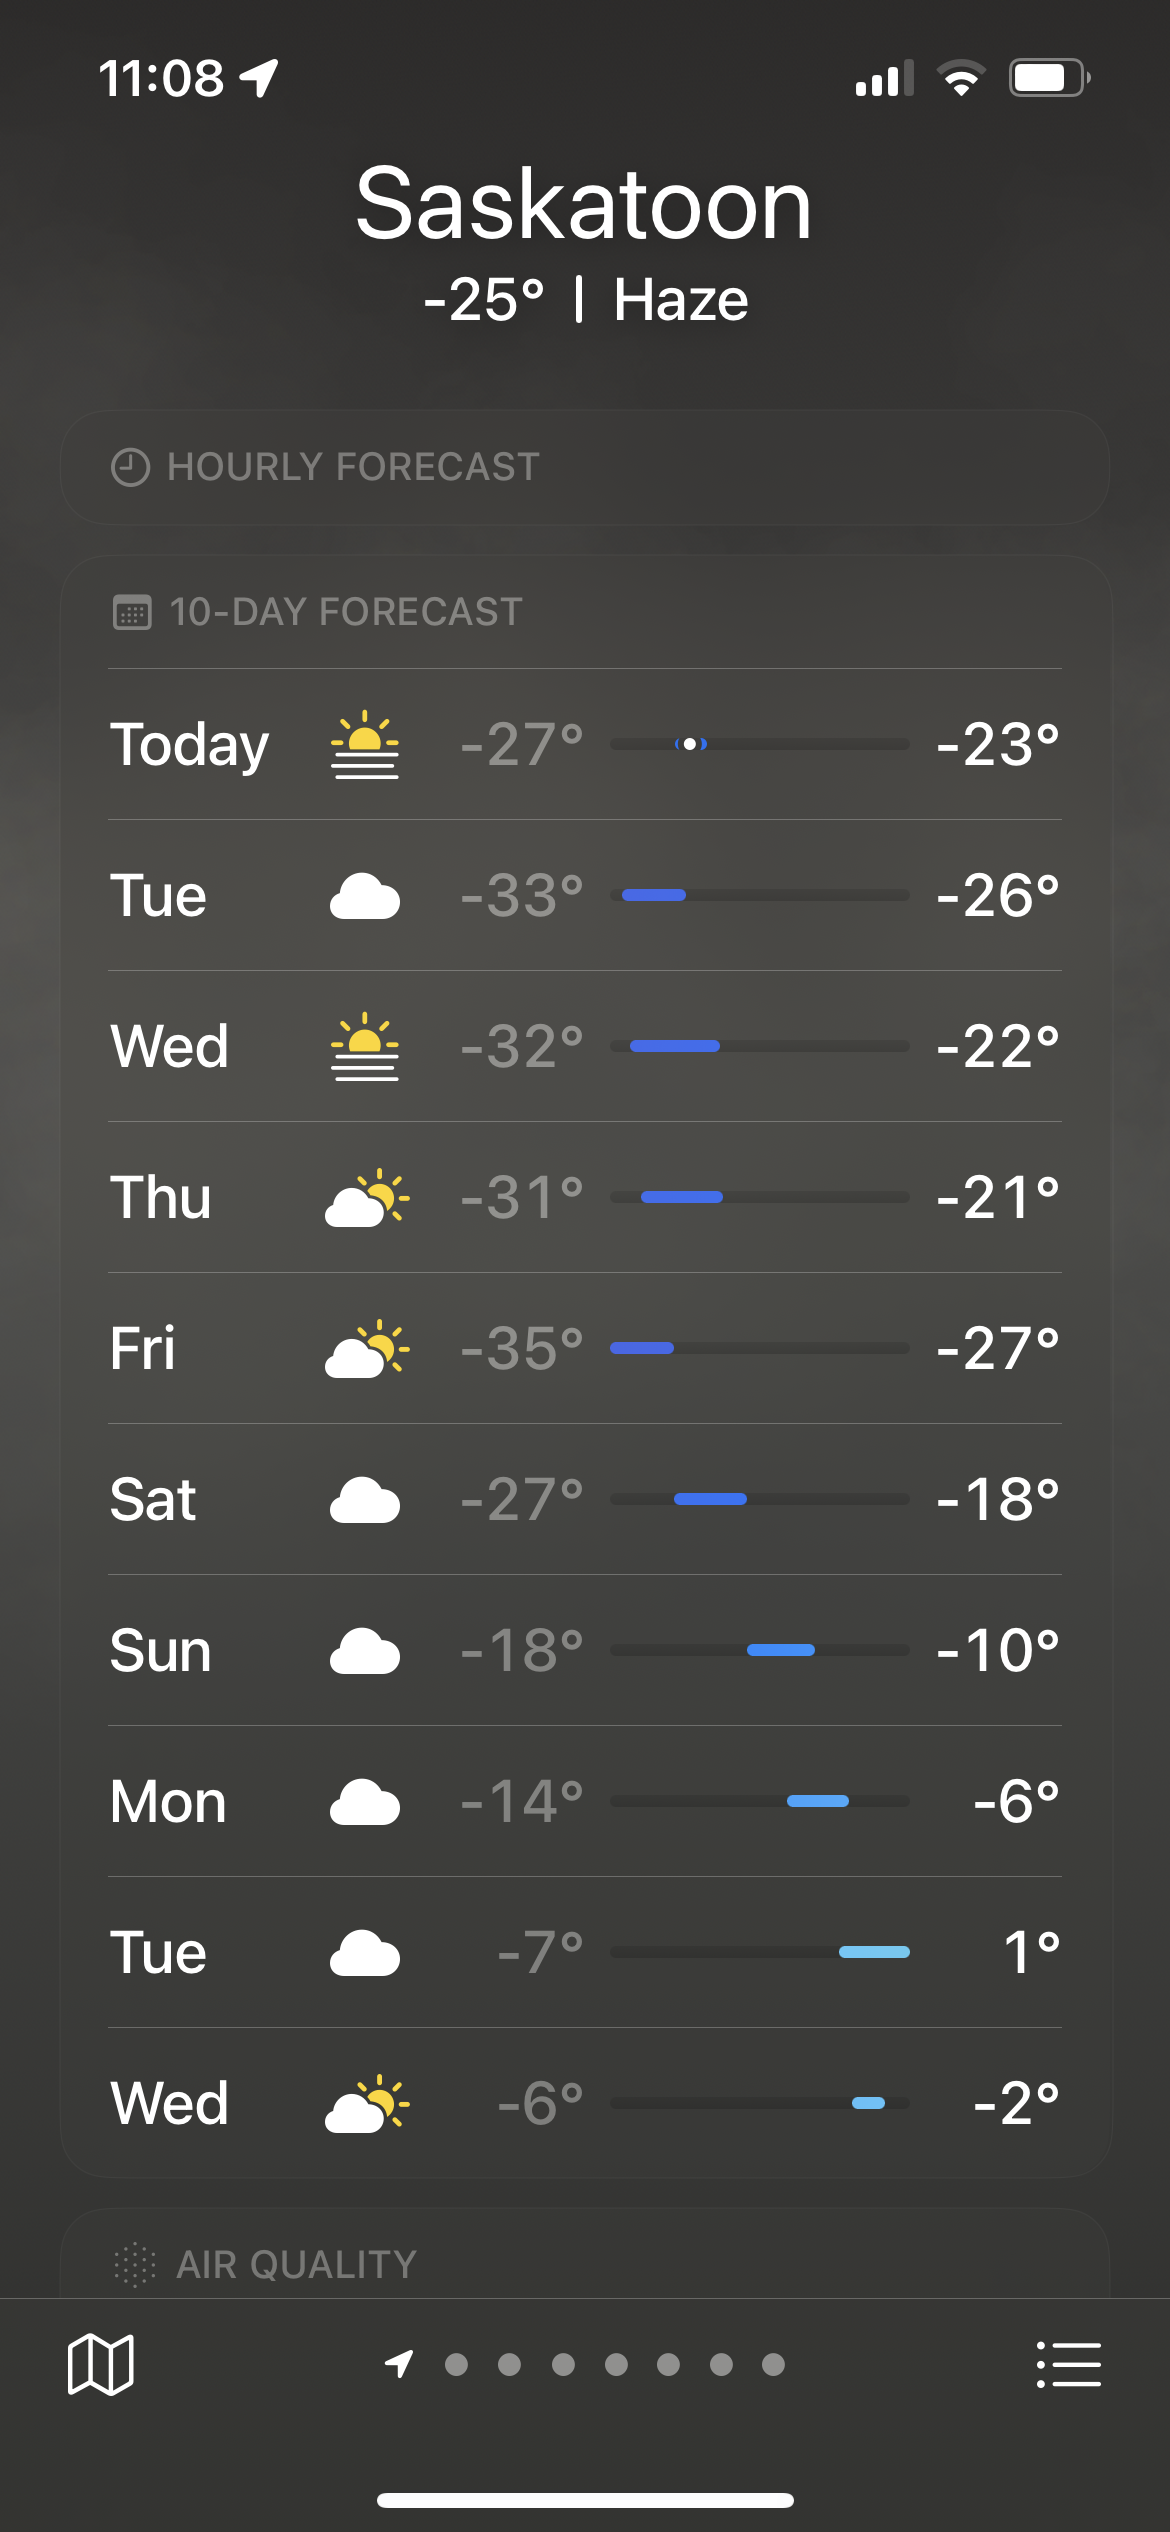 Saskatoon weather in the -18 to -24C range until week from now it says +1. 